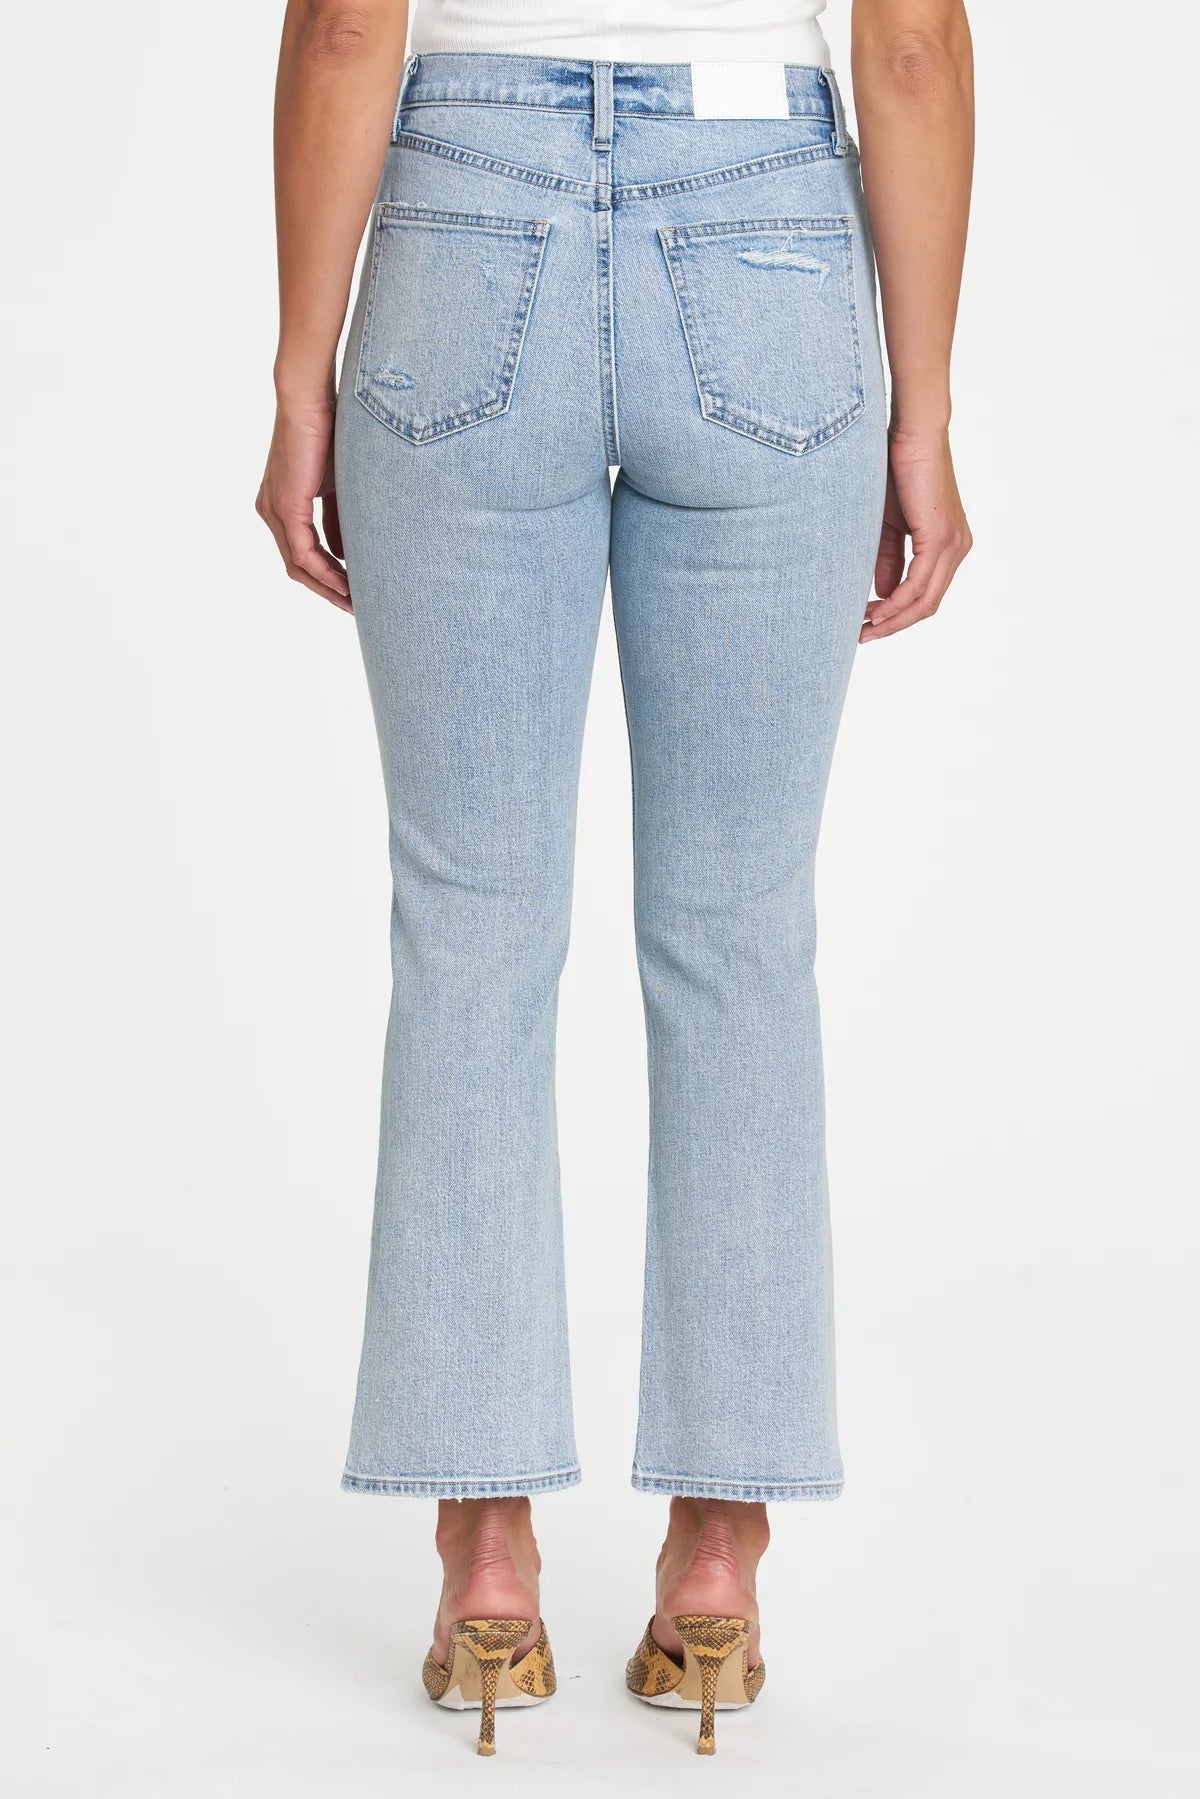 Lennon Jeans | High Rise Rainer Distressed